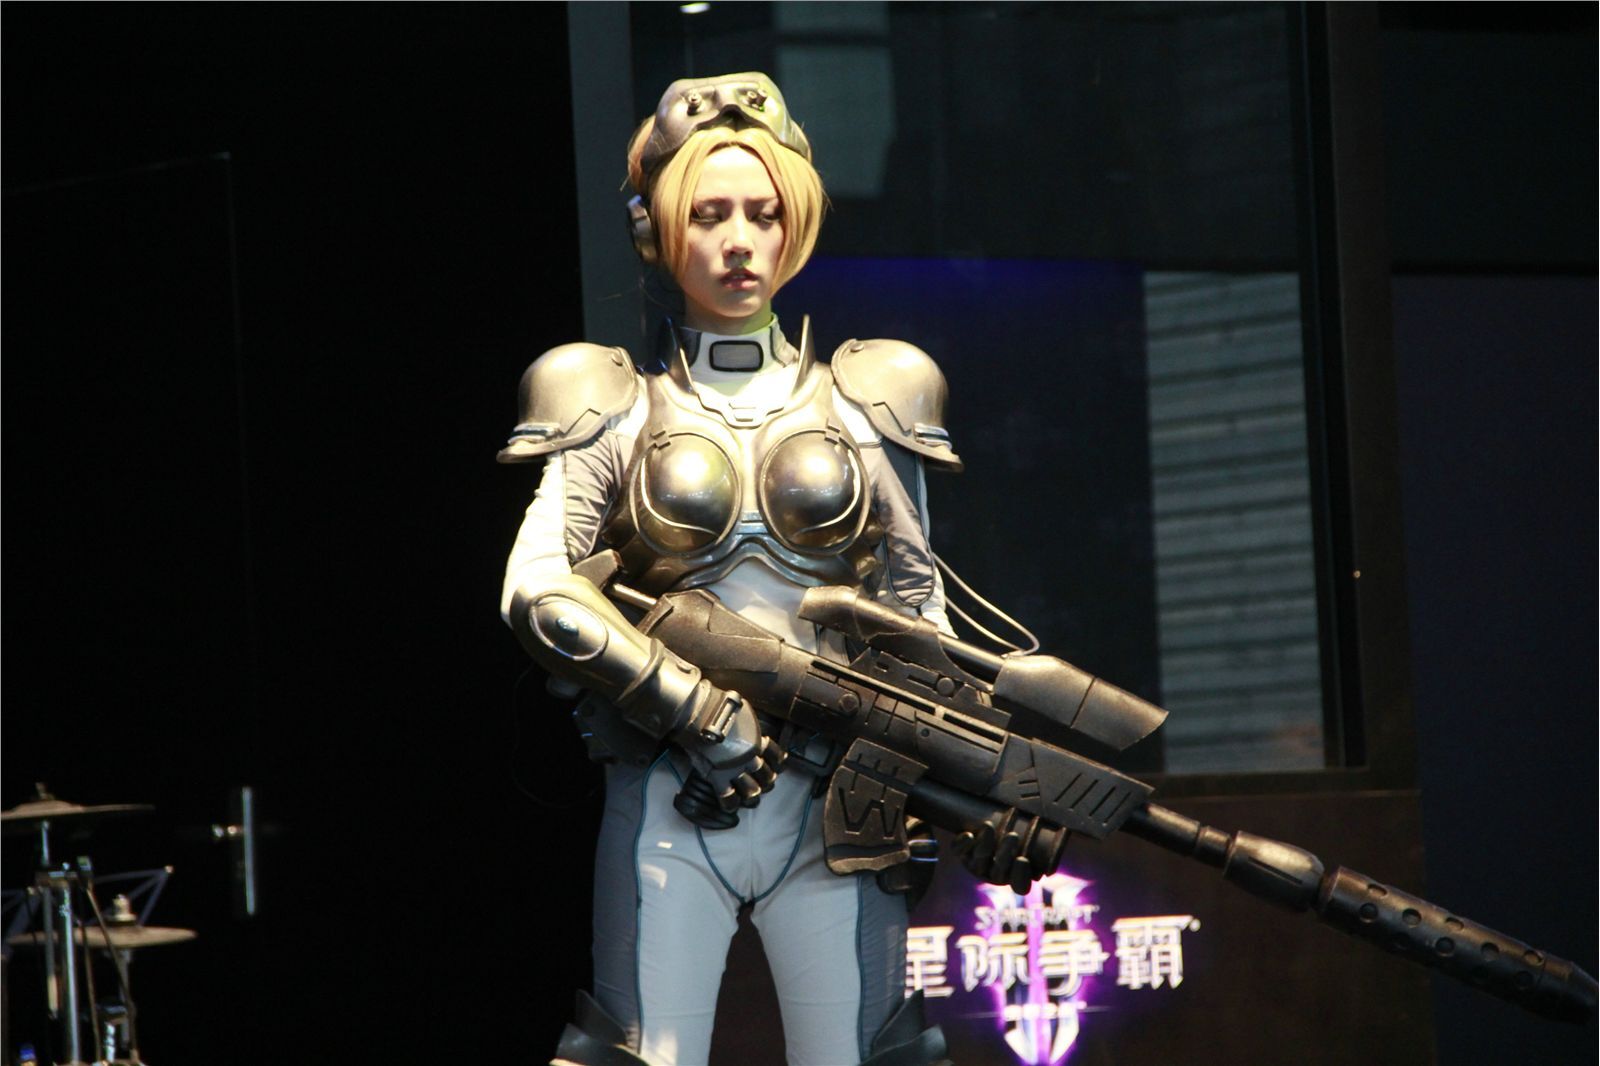 [online collection] the first day of the 11th Shanghai ChinaJoy 2013